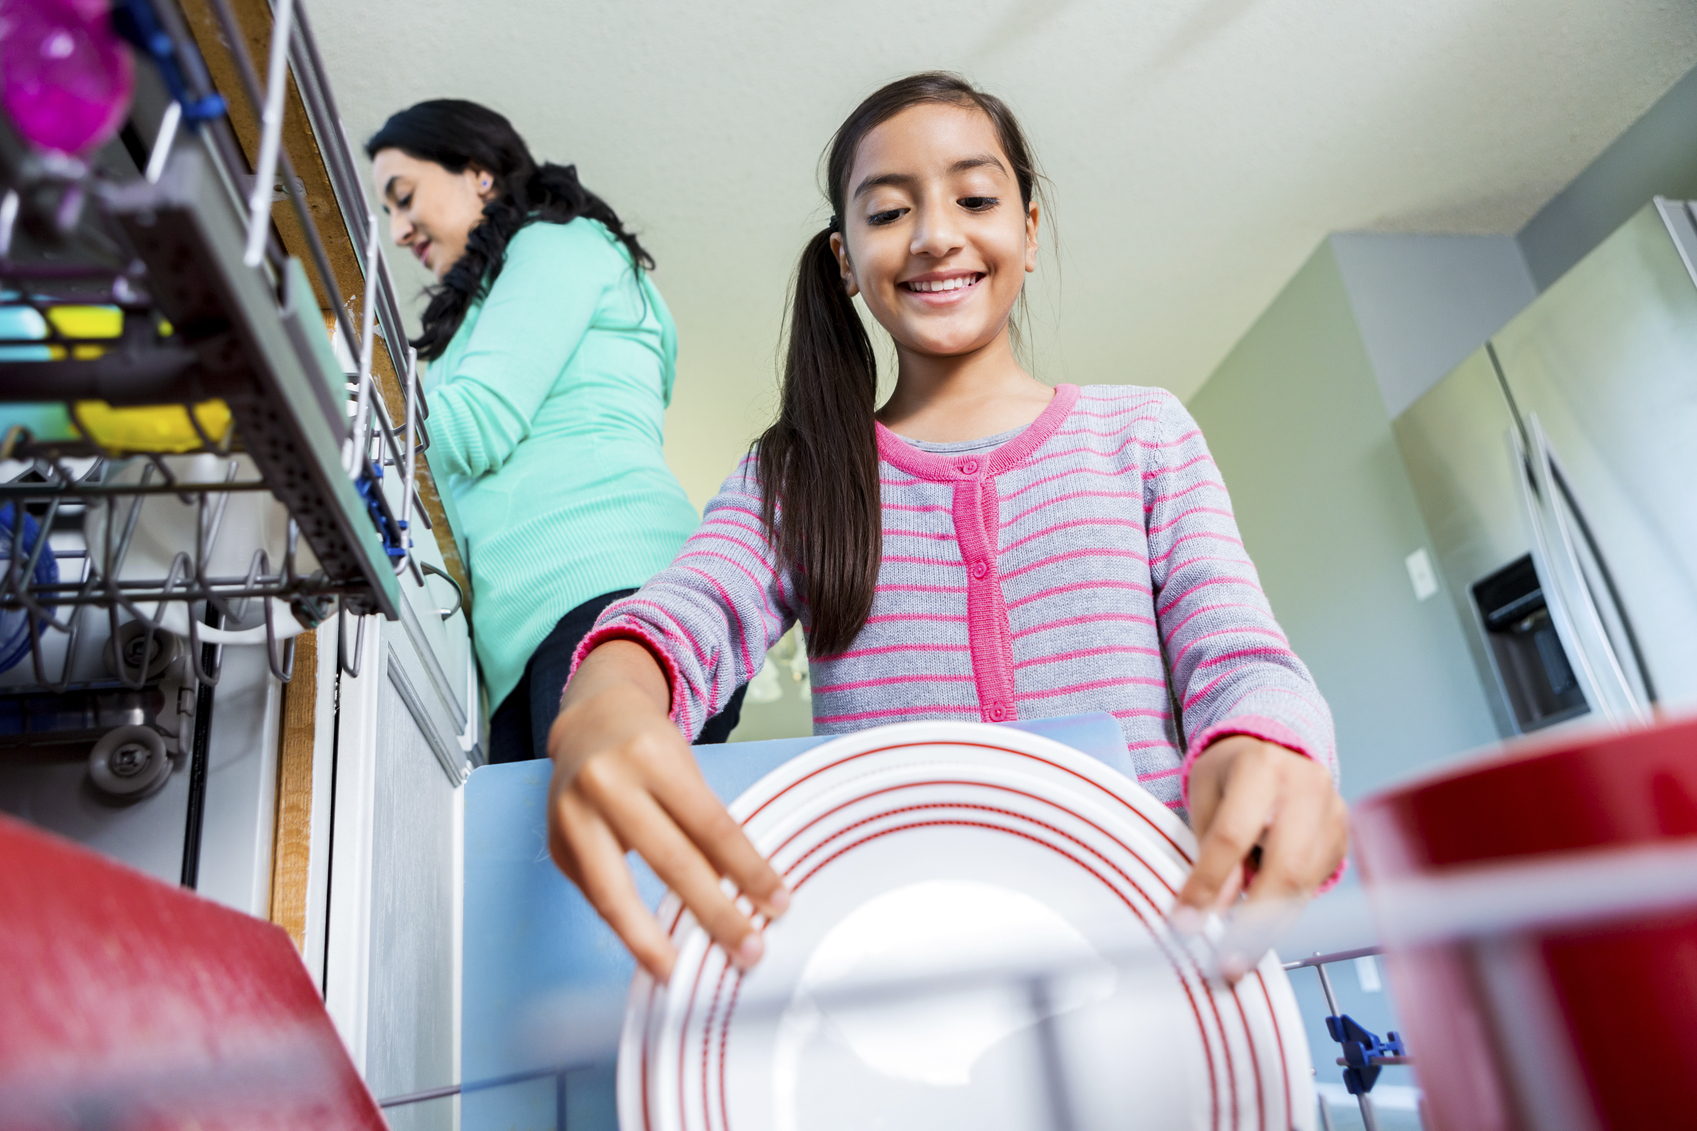 Cute pre-teen Hispanic girl smiles as she loads a plate into the dishwasher. Her mom is rinsing off the dishes in the background. Photo shot from low angle view point.